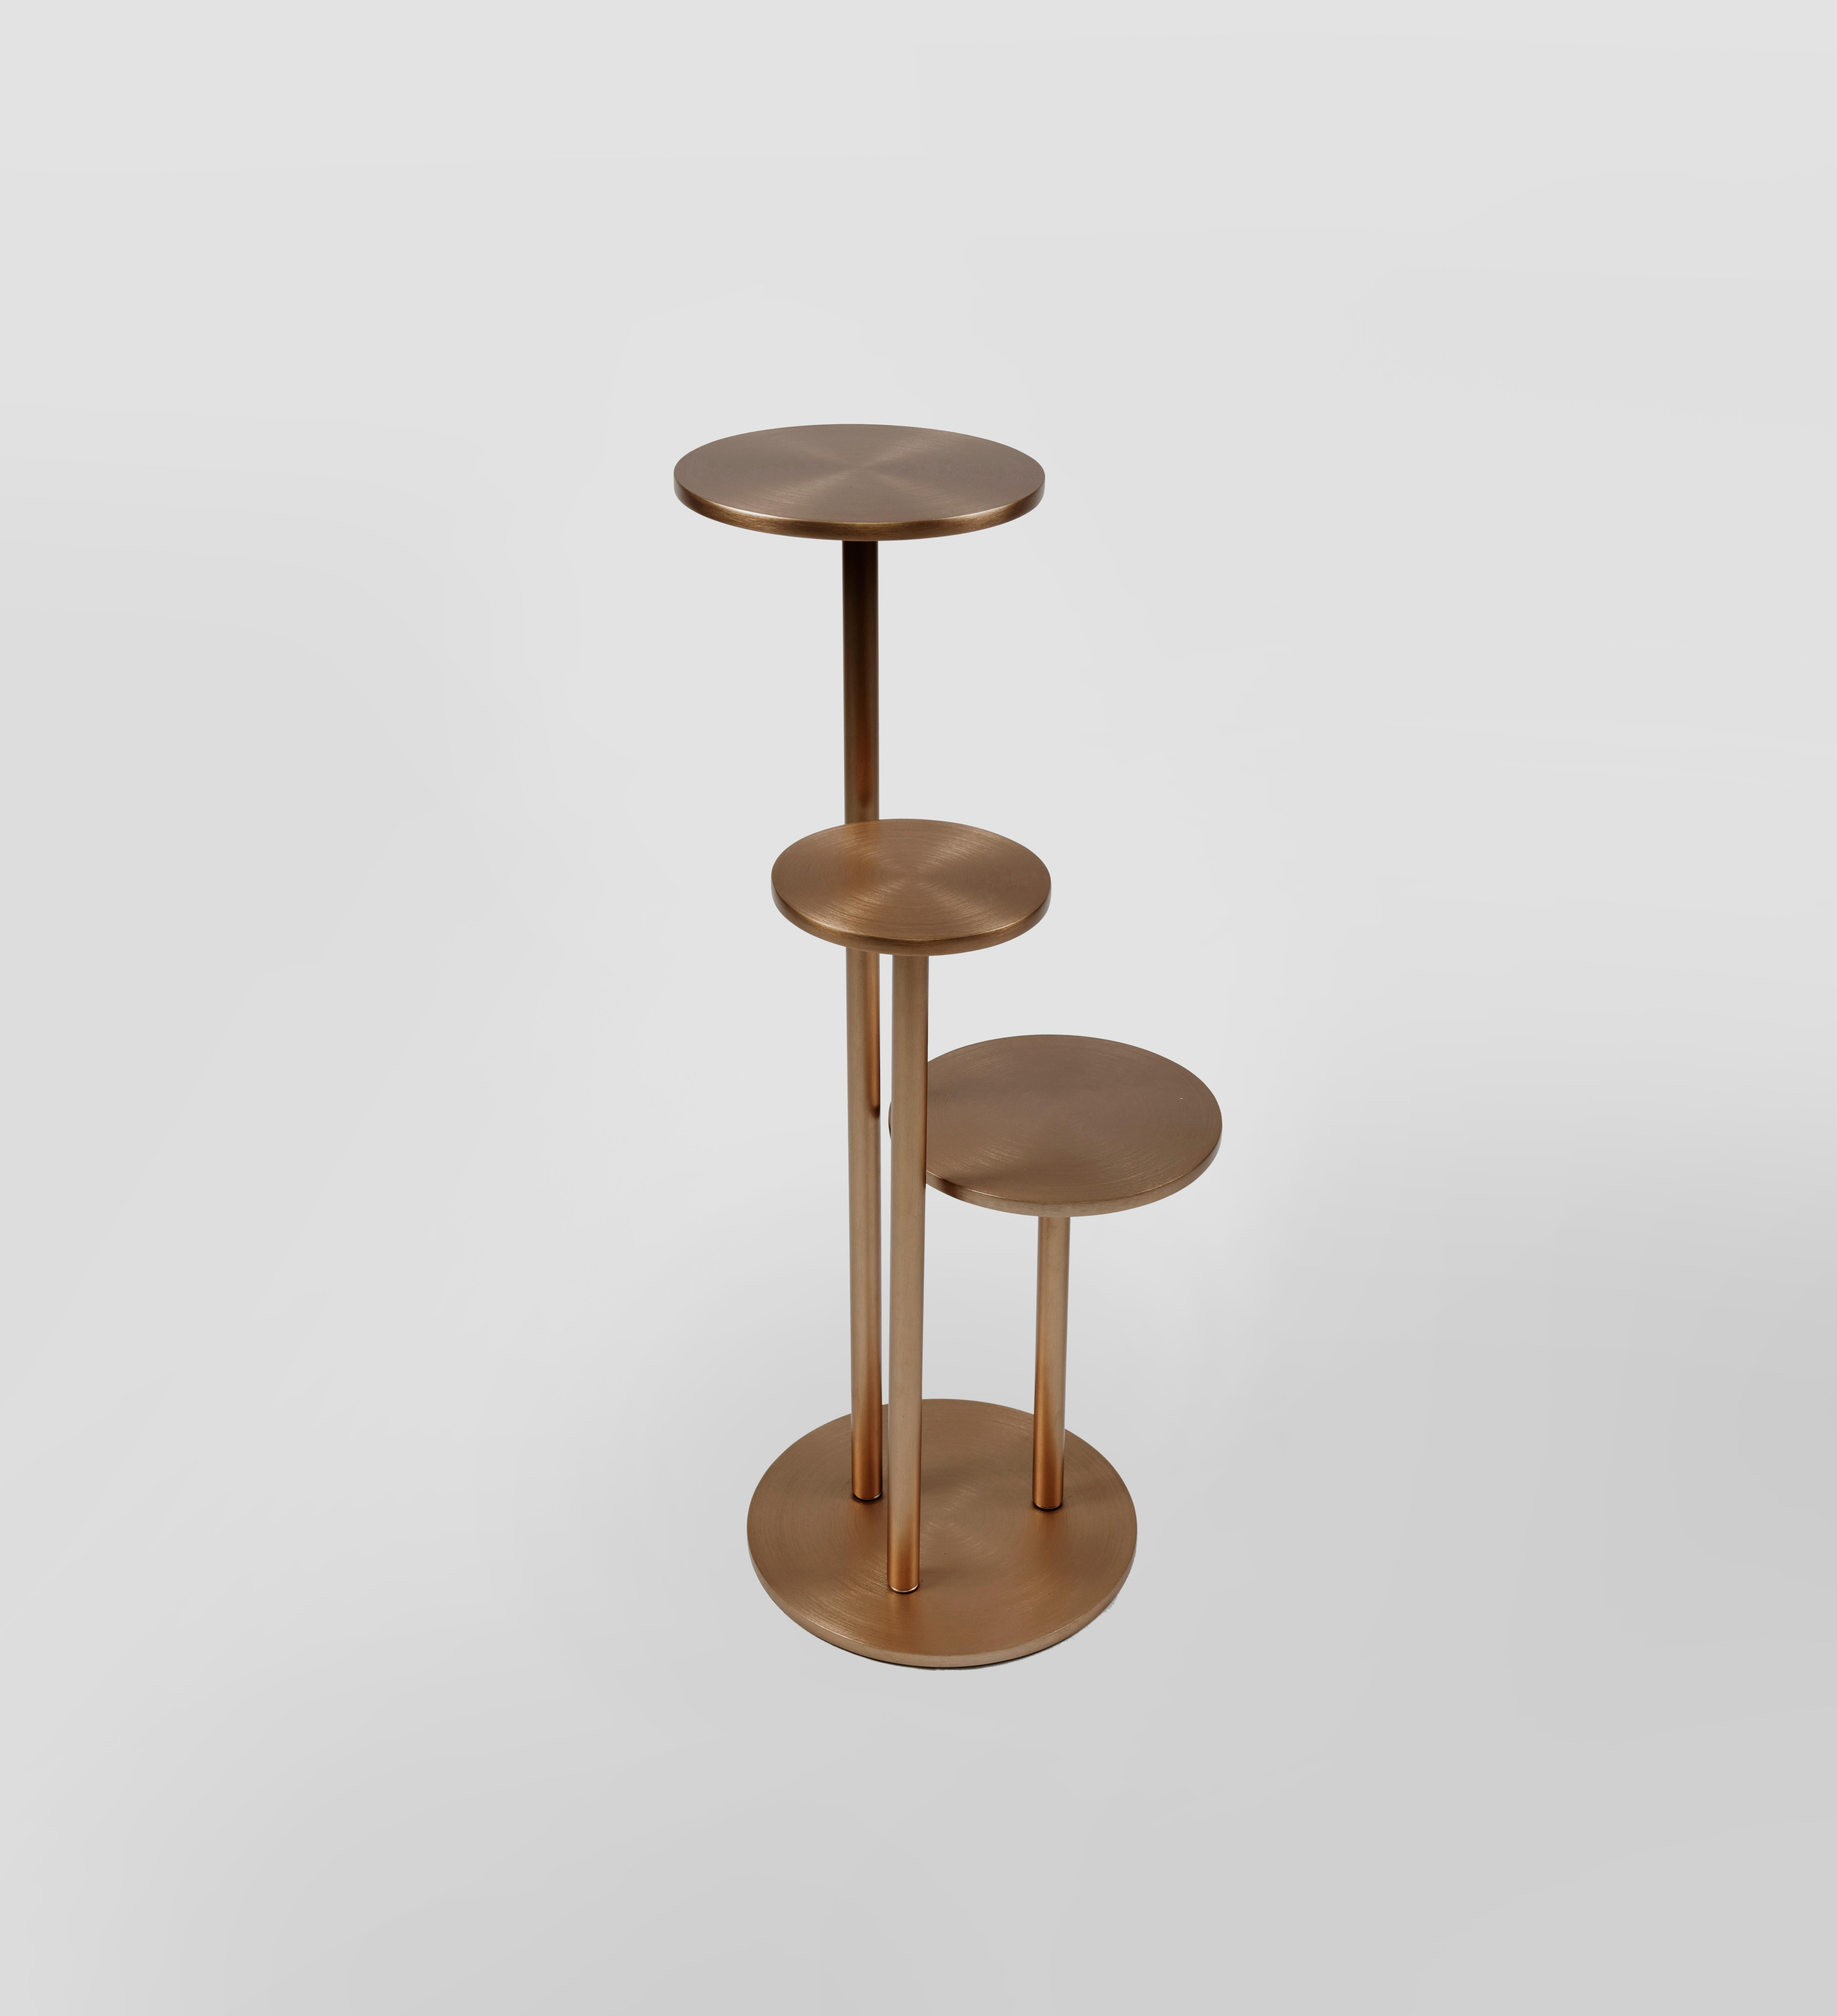 The 3 kings of Orion’s belt, offering 3 different heights and sizes of brushed metal disc, the combination of which provides a practical and sculptural side table. Orion is available in a number of metal finishes including satin and polished